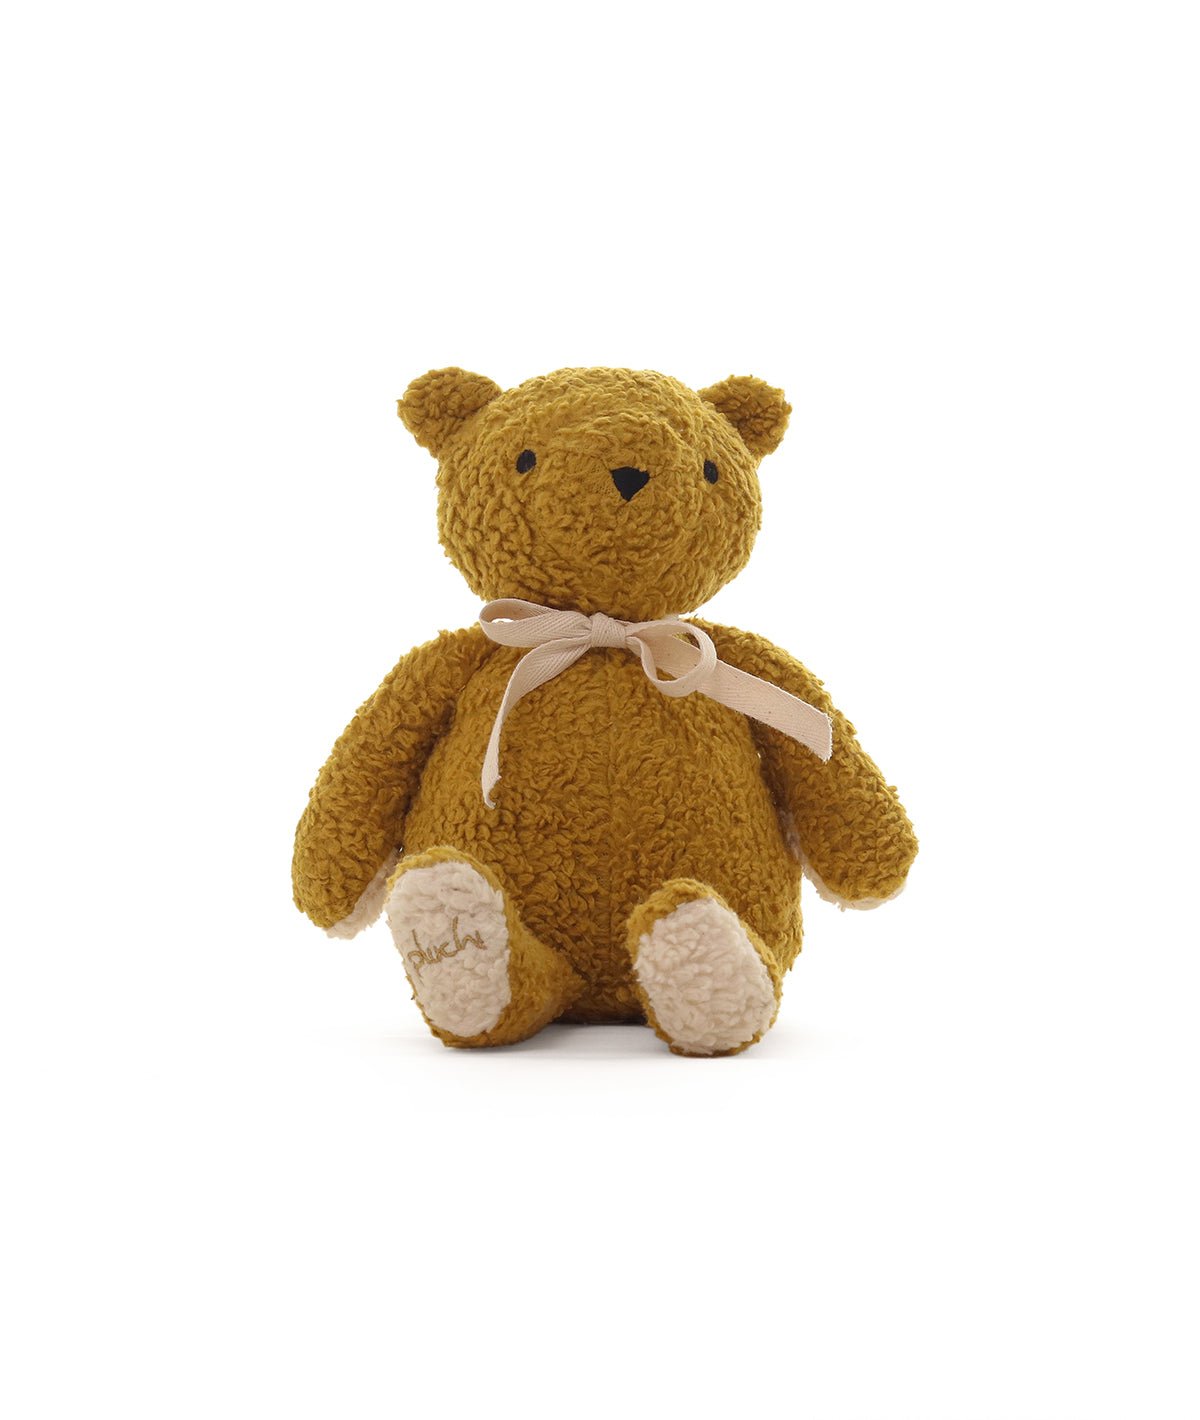 Mr. Fluff Cotton Knitted Stuffed Soft Toy (Honey Gold)